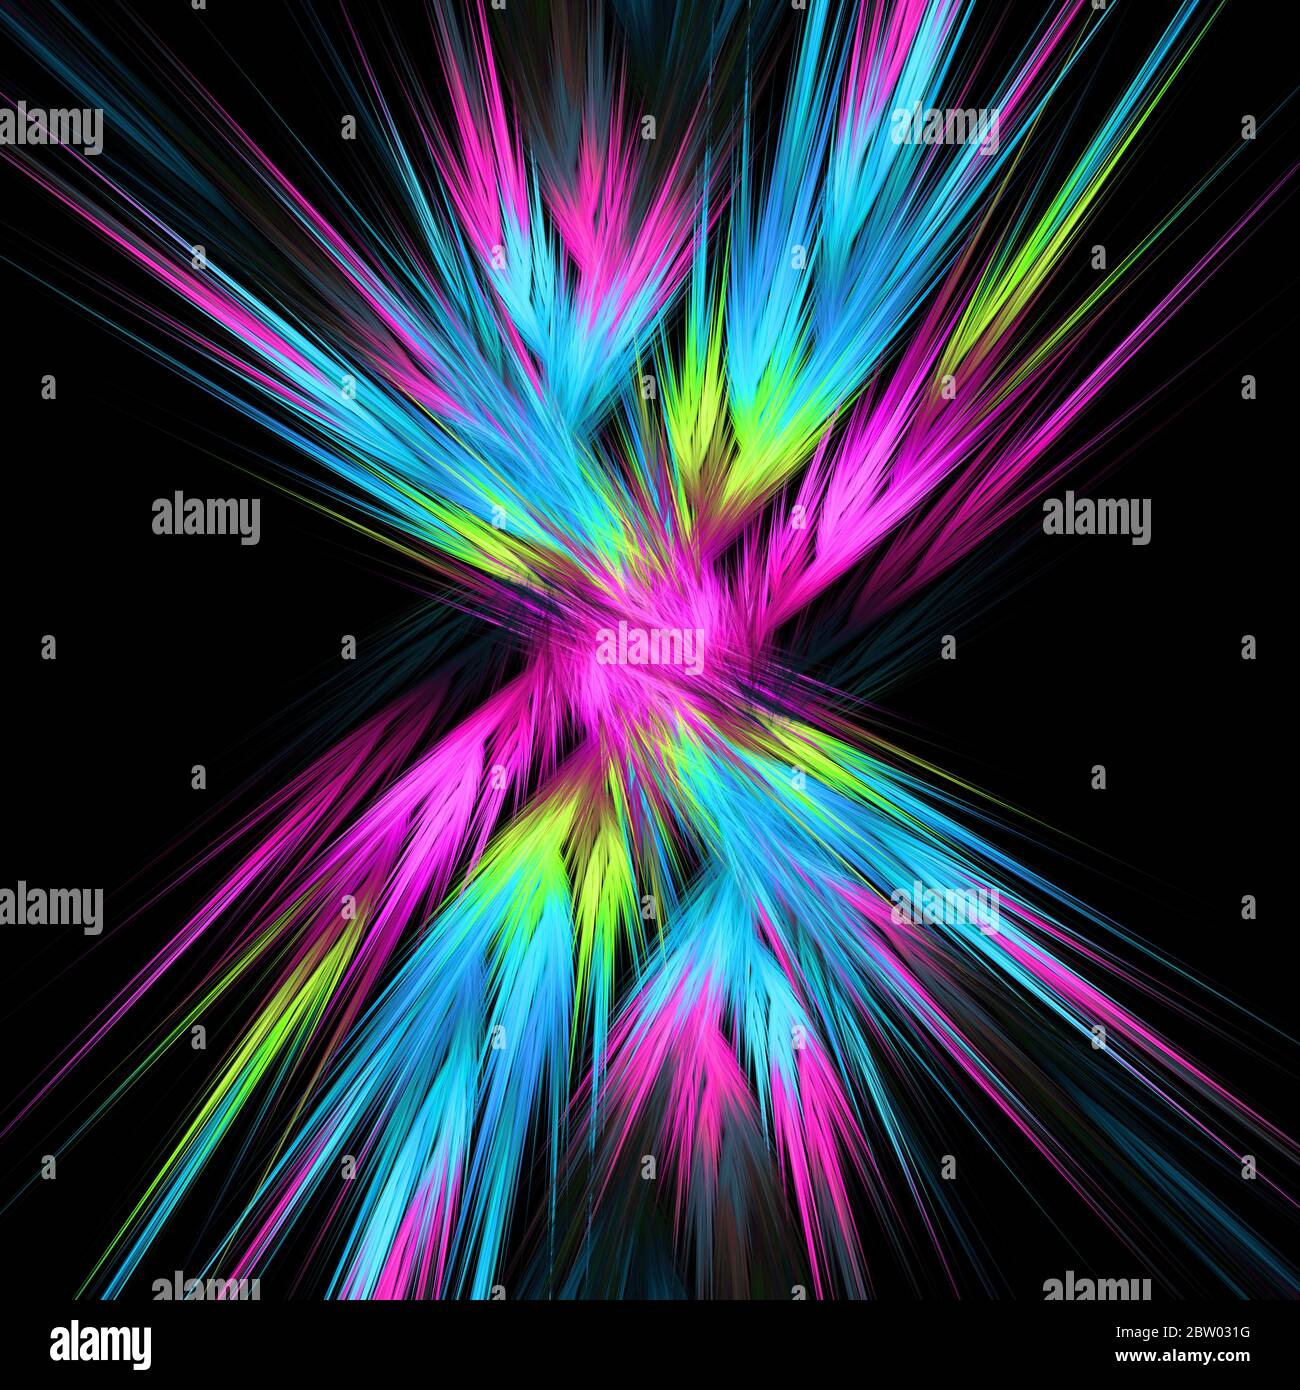 Vivid and fluorescent abstract art of moving and crossing lines Stock Photo